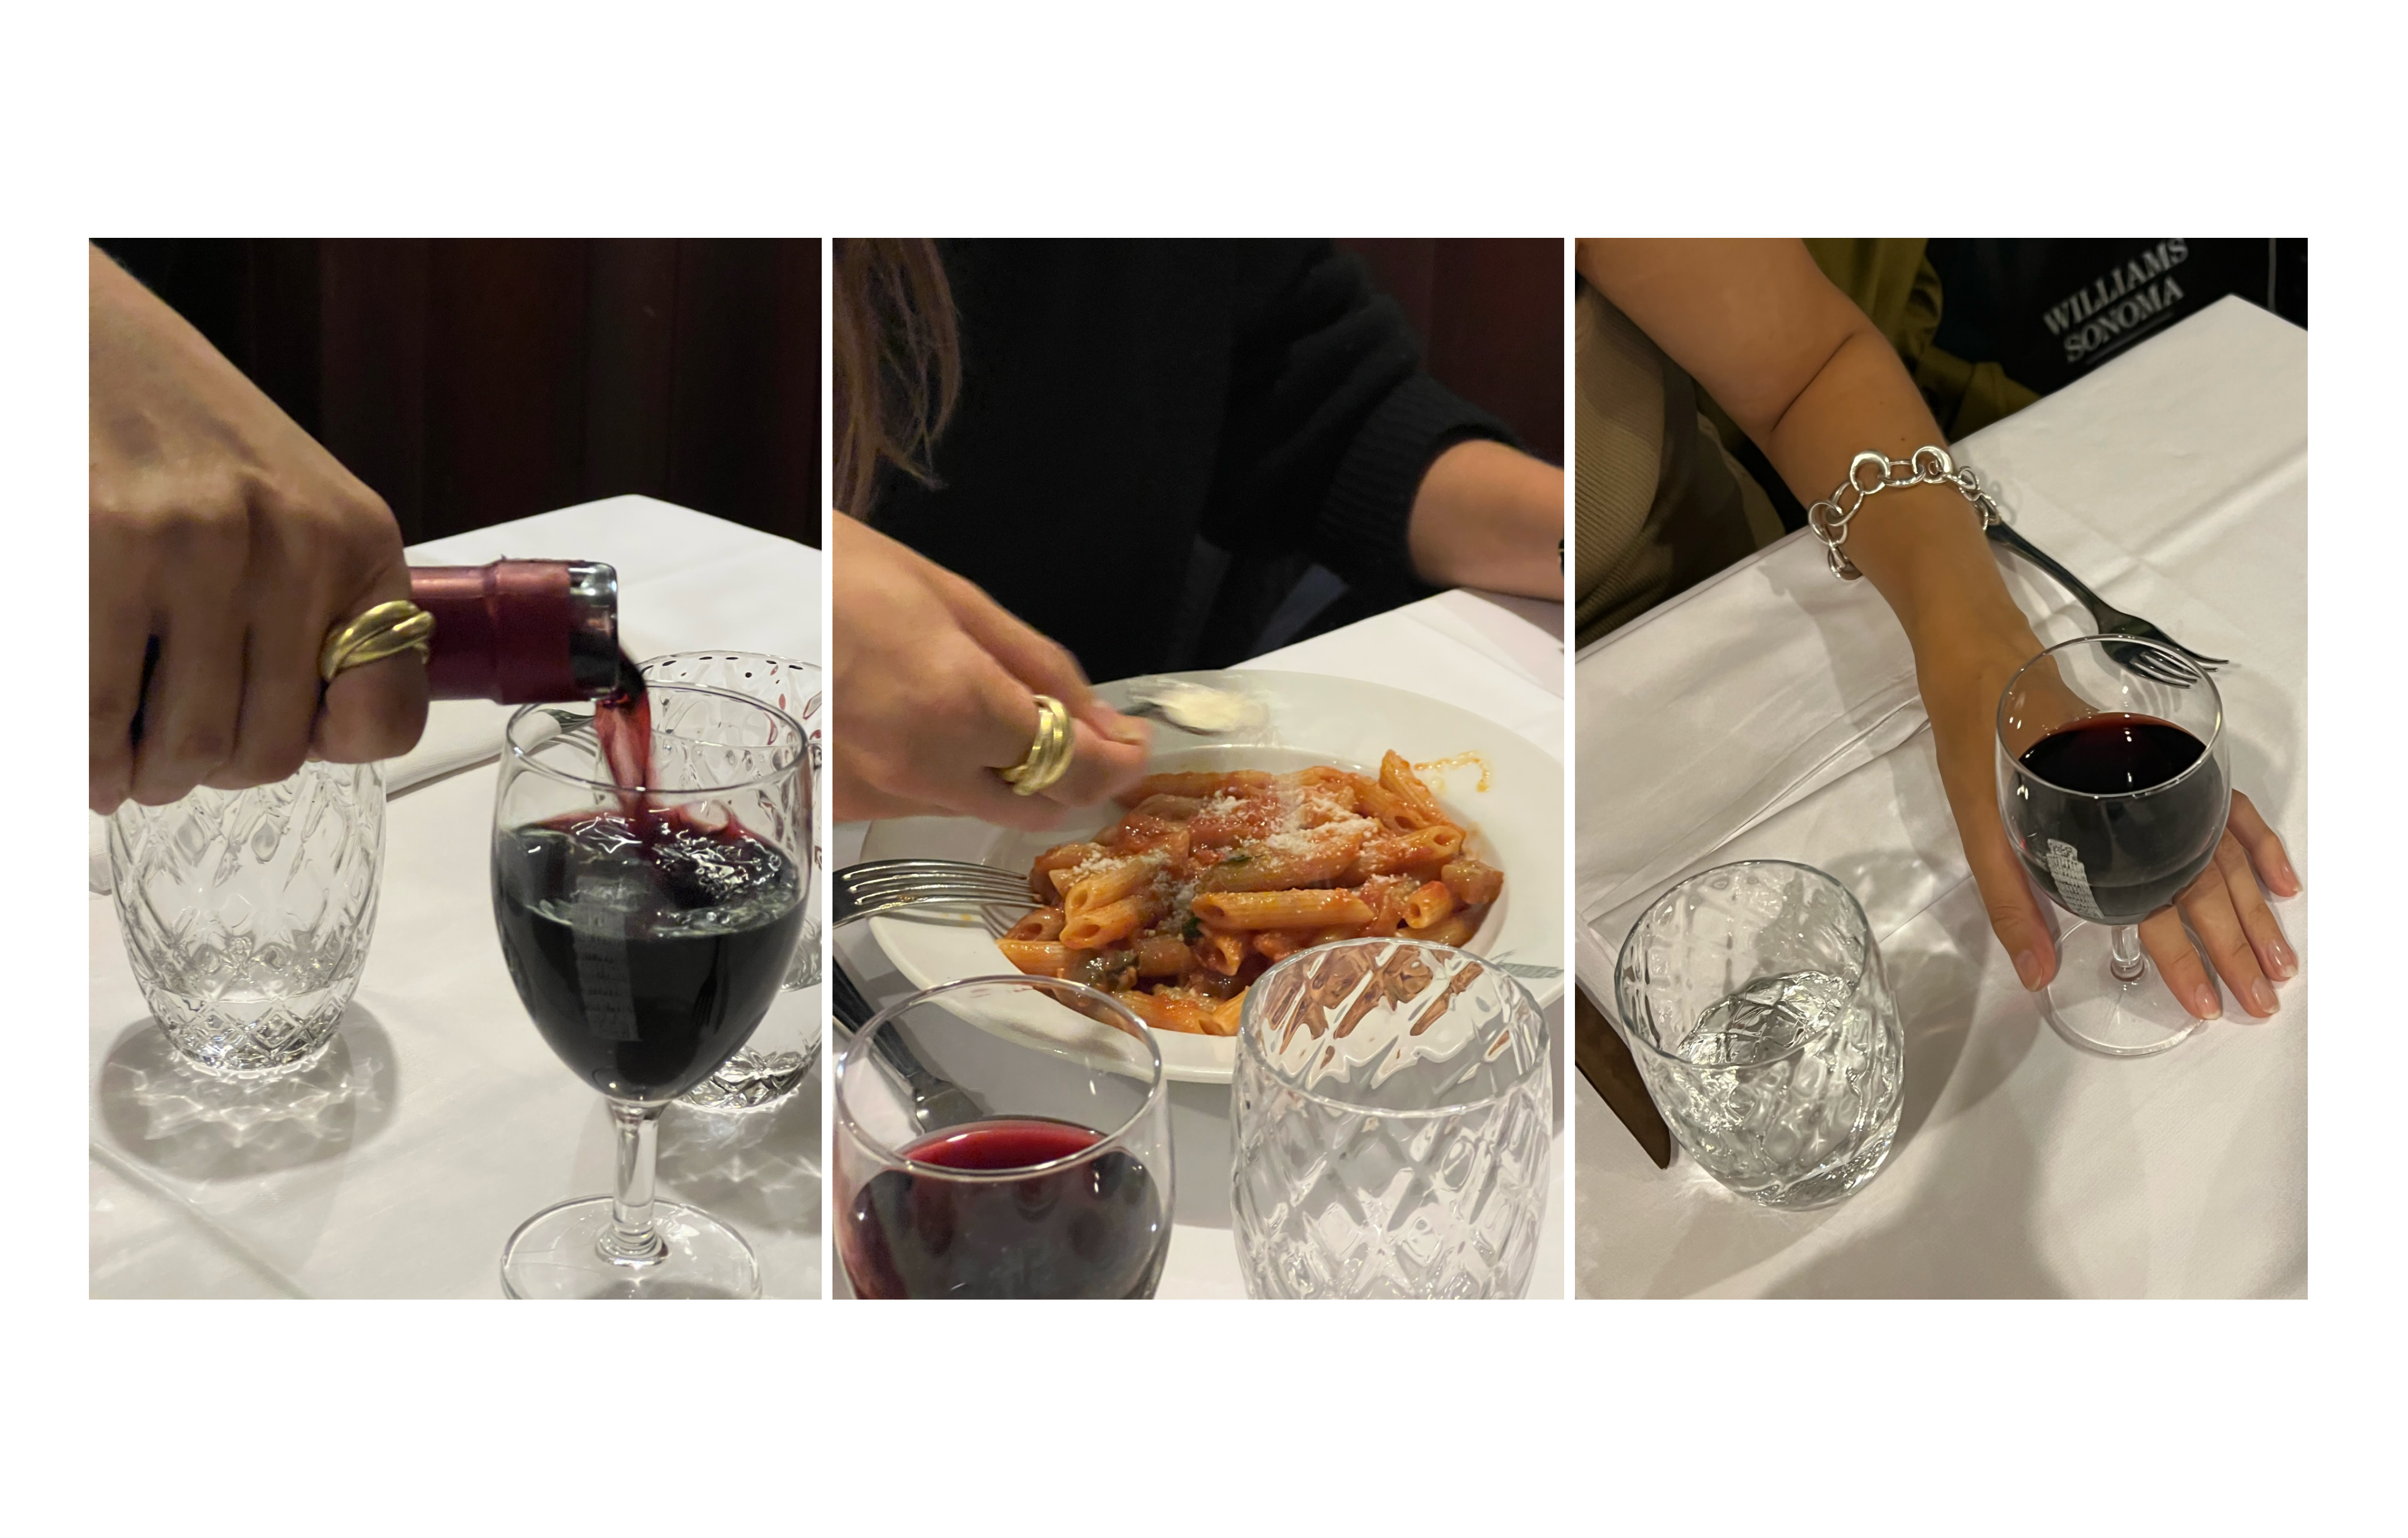 From a dinner at Trattoria Torre Di Pisa in the Brera neighborhood.